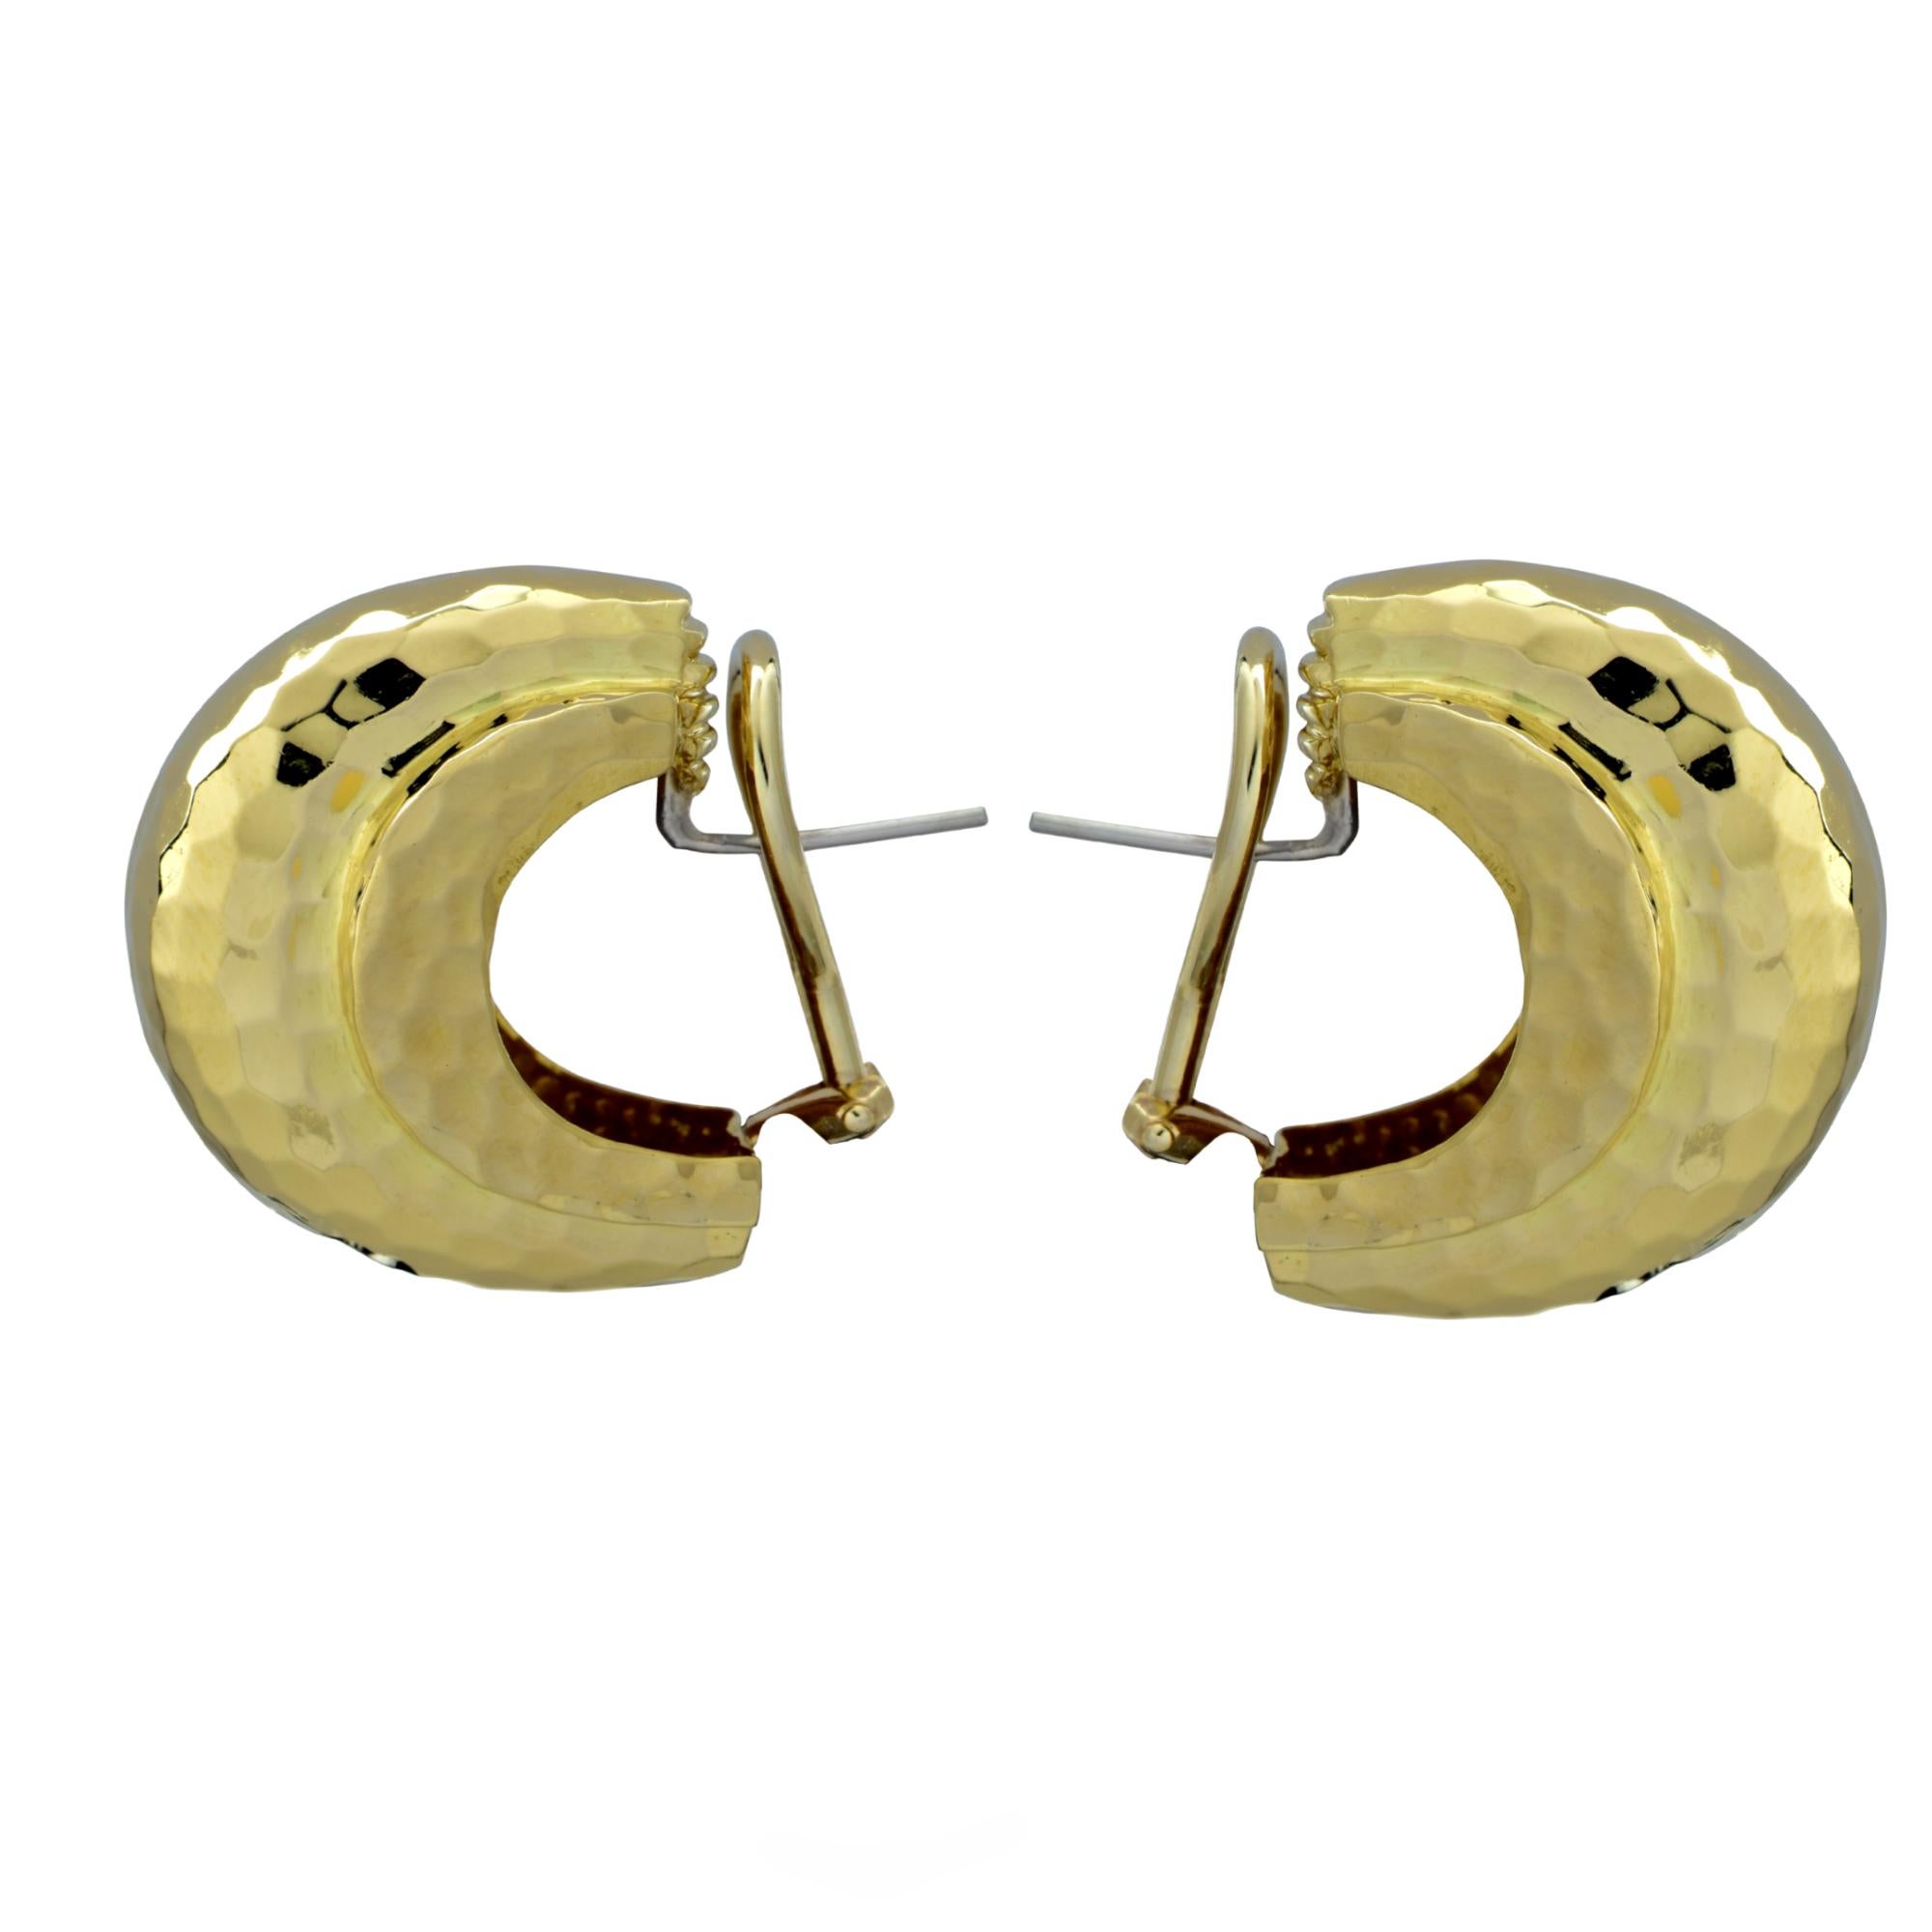 Fabulous 18 karat yellow gold Tiffany & Co.  hoop earrings featuring a modernistic hammered finish. These chic earrings measure 24.14mm x 17.84mm. Currently they are for pierced ears but, can be converted to clip-ons easily.

Our pieces are all